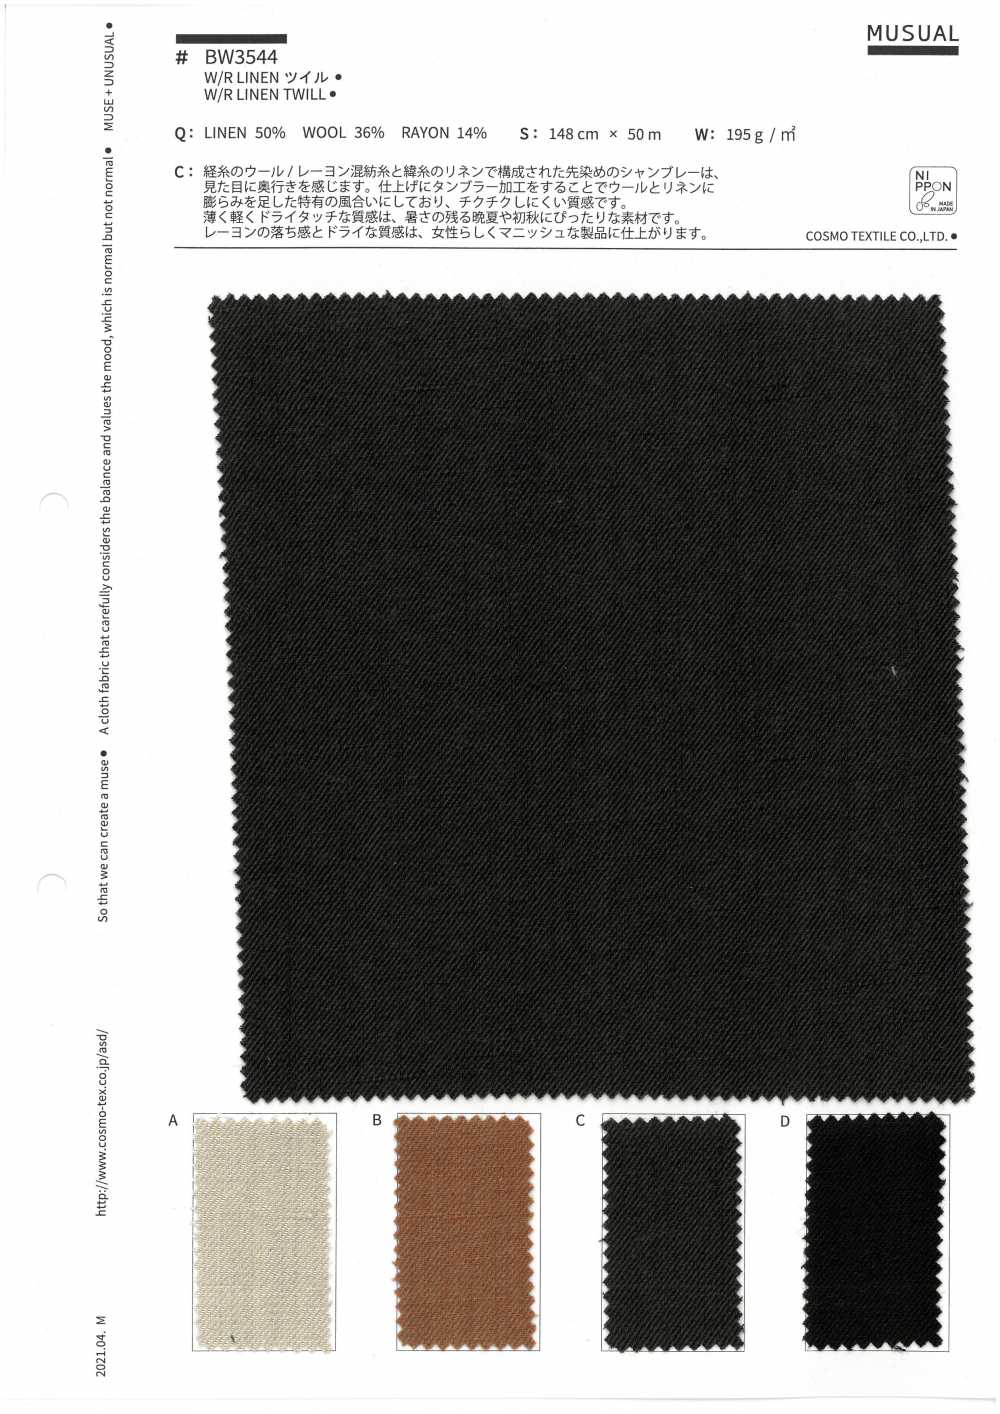 BW3544 [OUTLET] W / R LINEN Twill[Textile / Fabric] COSMO TEXTILE